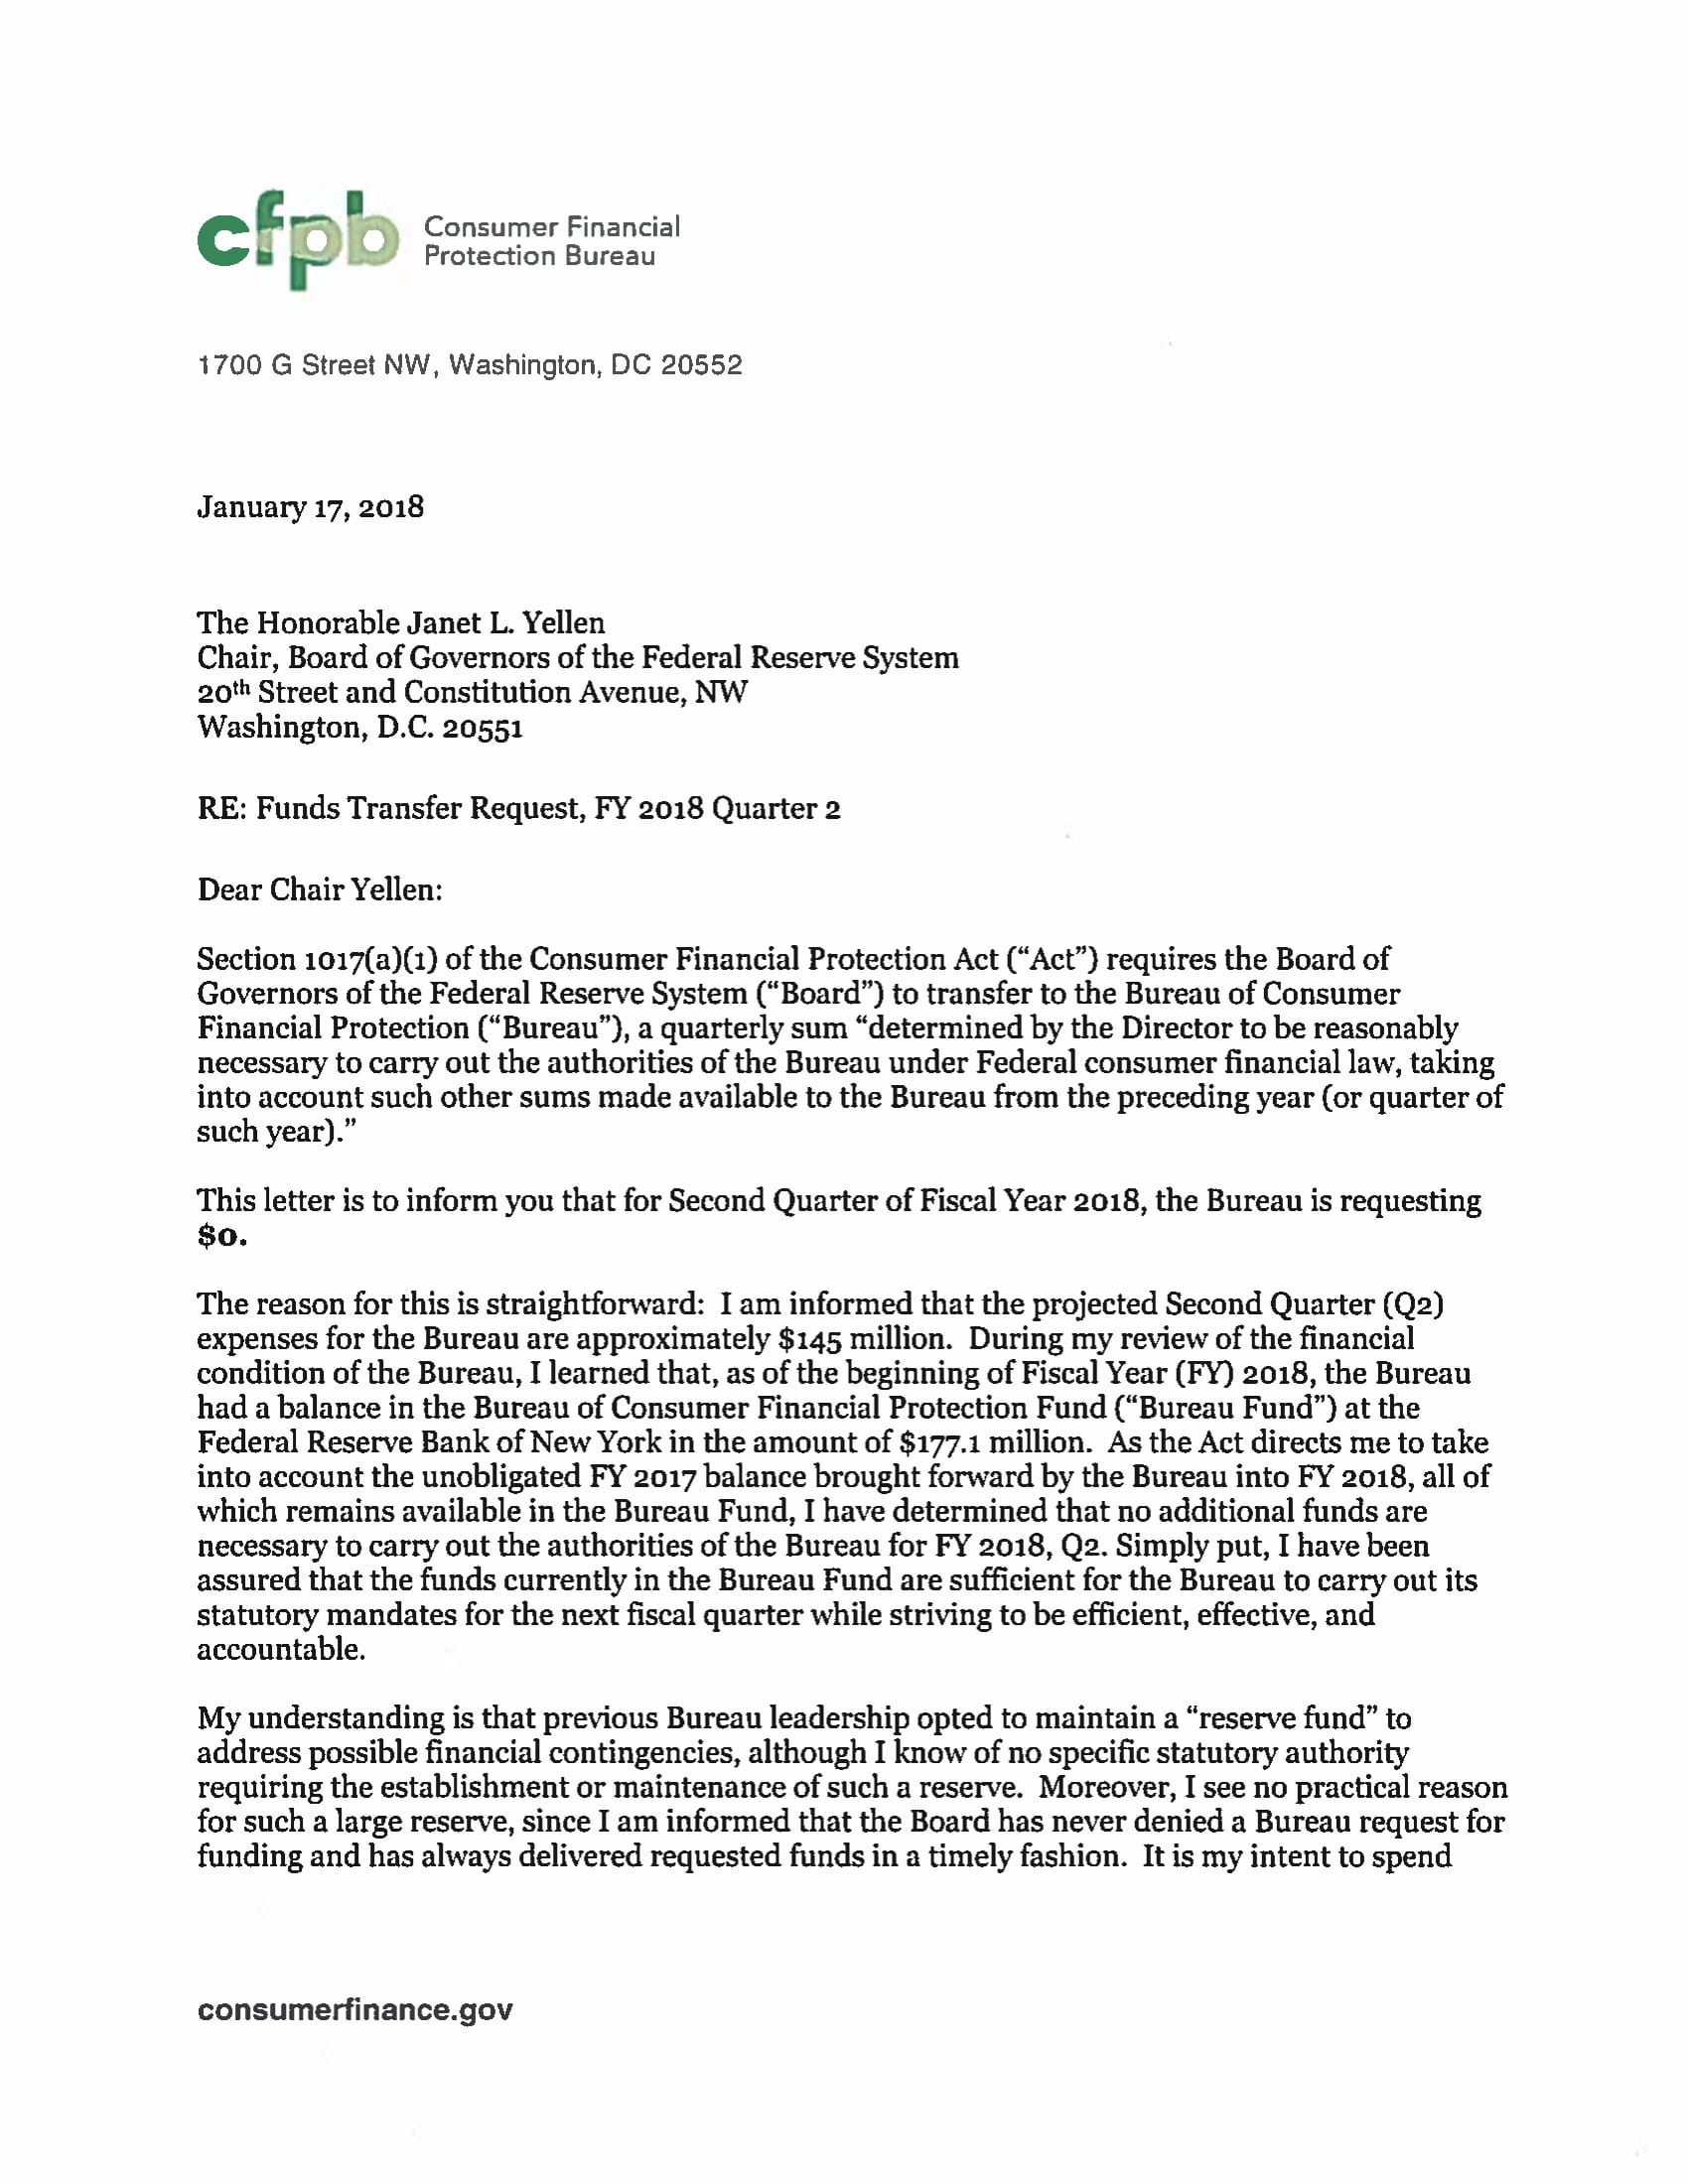 government funds transfer request letter example